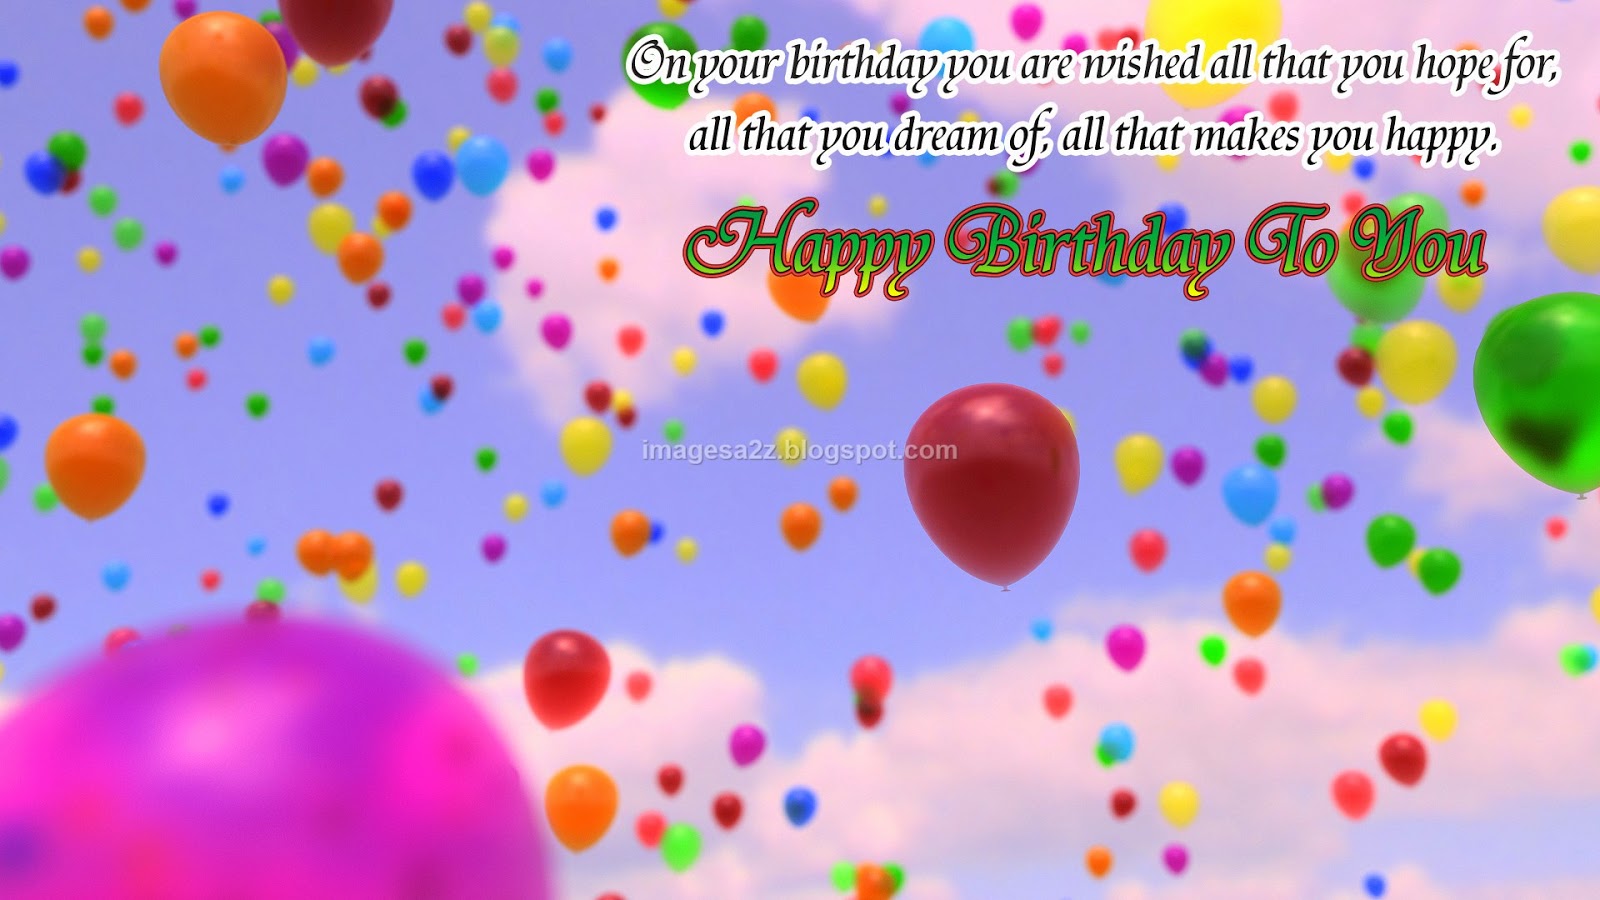 birthday wishes for best friend images  happybirthdaywishesquotes 